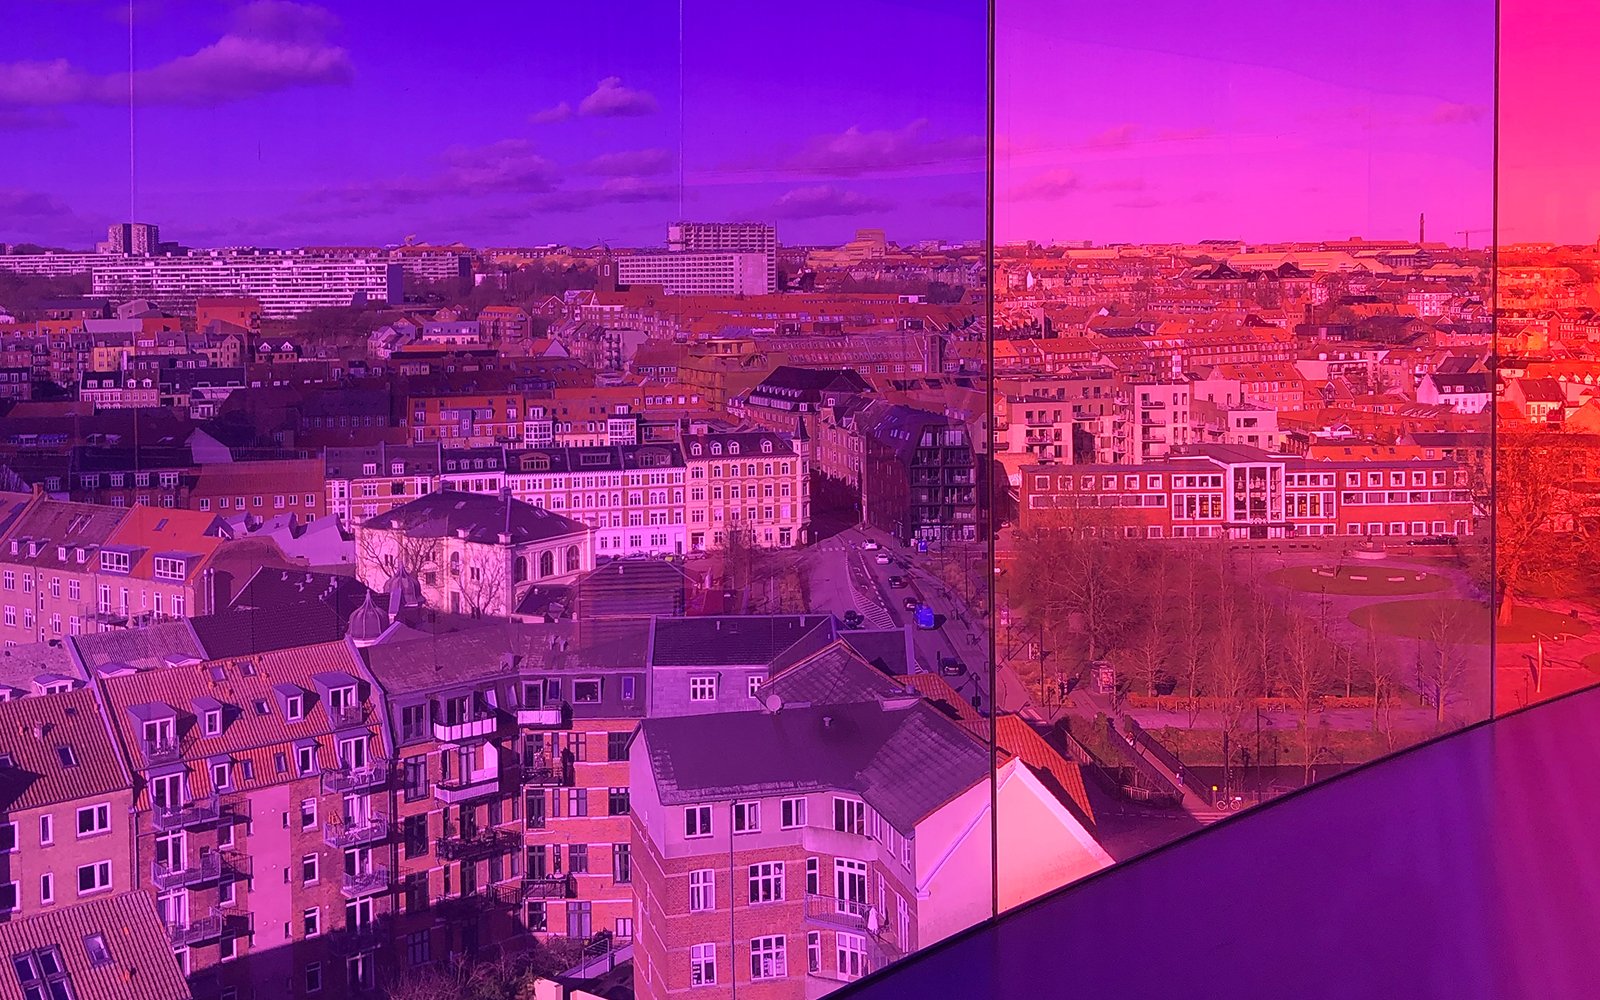 View of city through windows with colorful filters